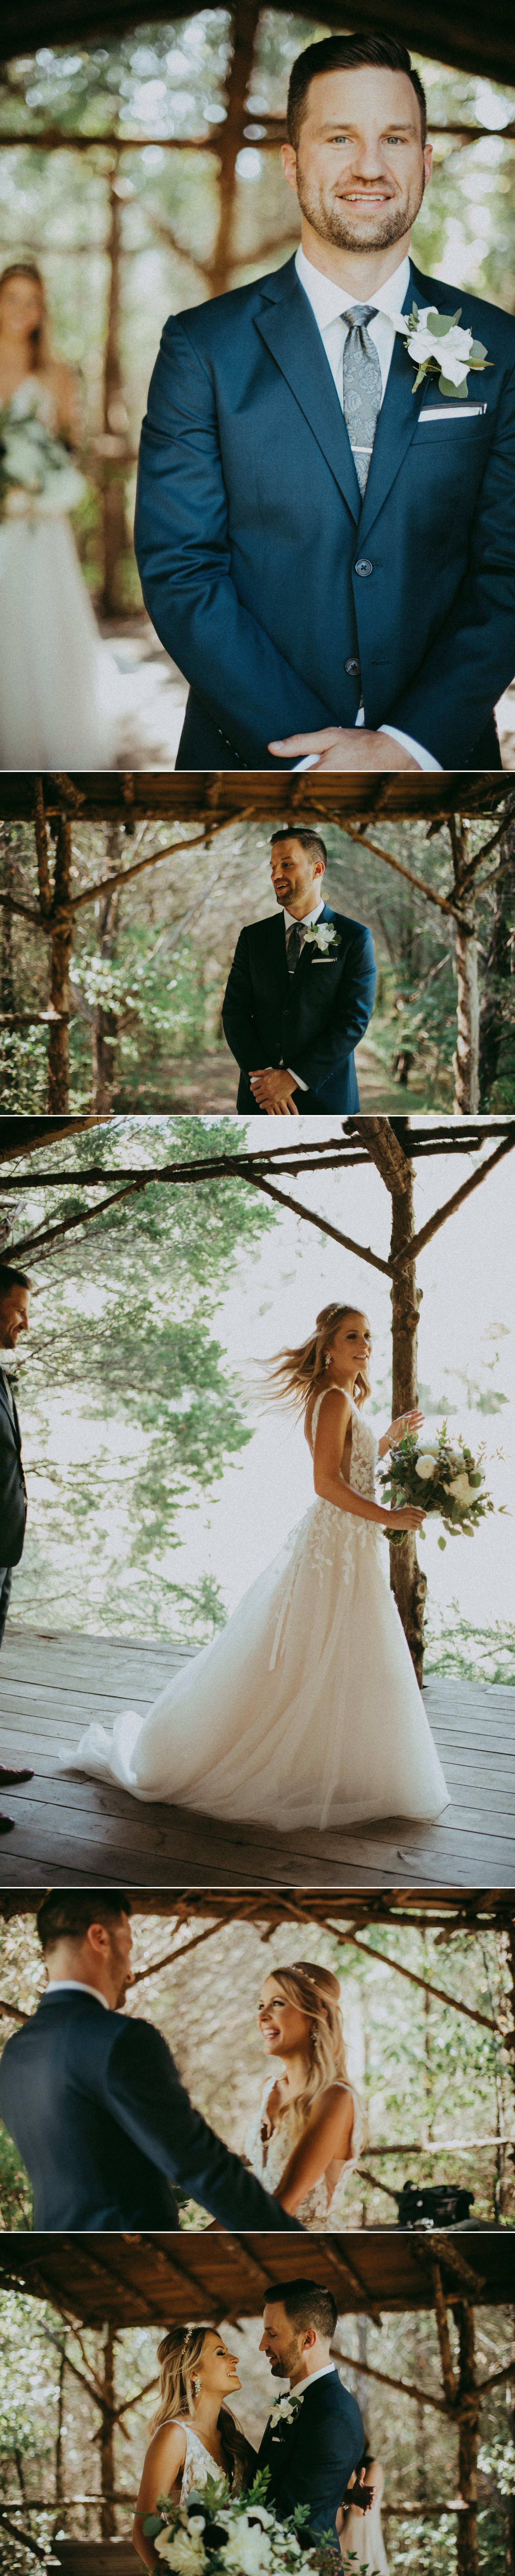 bride and groom do first look in treehouse before wedding at cedarwood nashville TN, photos by Krista Lee